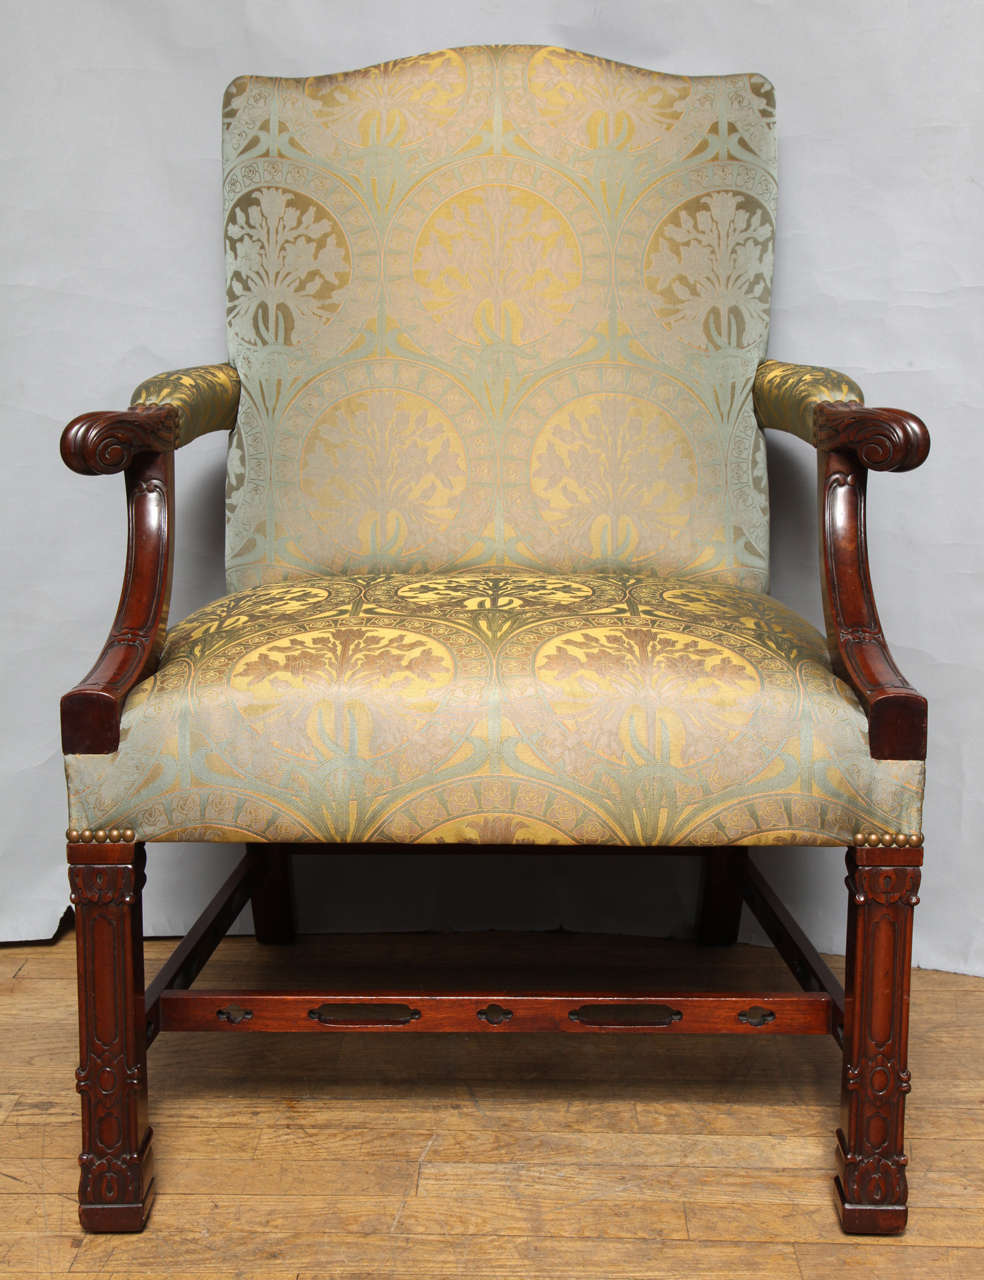 An English mahogany Chinese Chippendale style open arm chair. The upholstered back with arched top flanked by upholstered arms with up swept mahogany supports having scroll shaped hand rests. The square legs with closed fret Neo-Gothic tracery